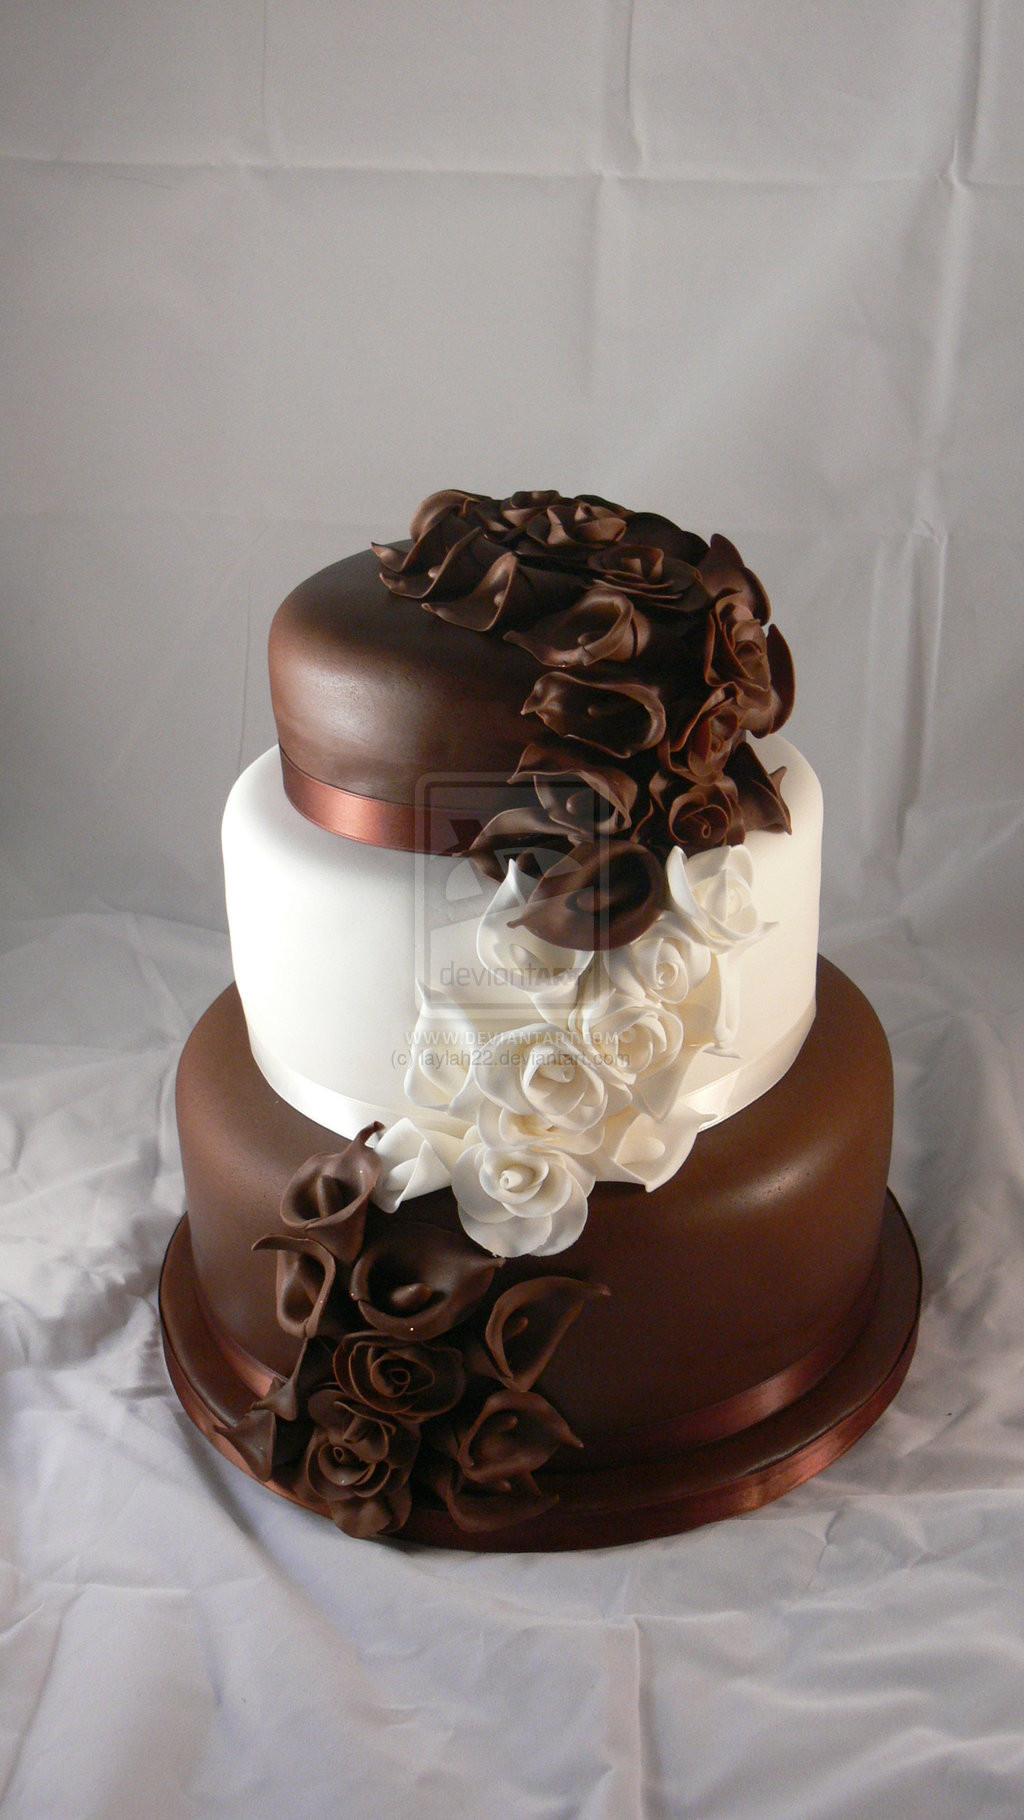 Chocolate and Vanilla Wedding Cakes 20 Of the Best Ideas for Chocolate and Vanilla Wedding Cake by Laylah22 On Deviantart